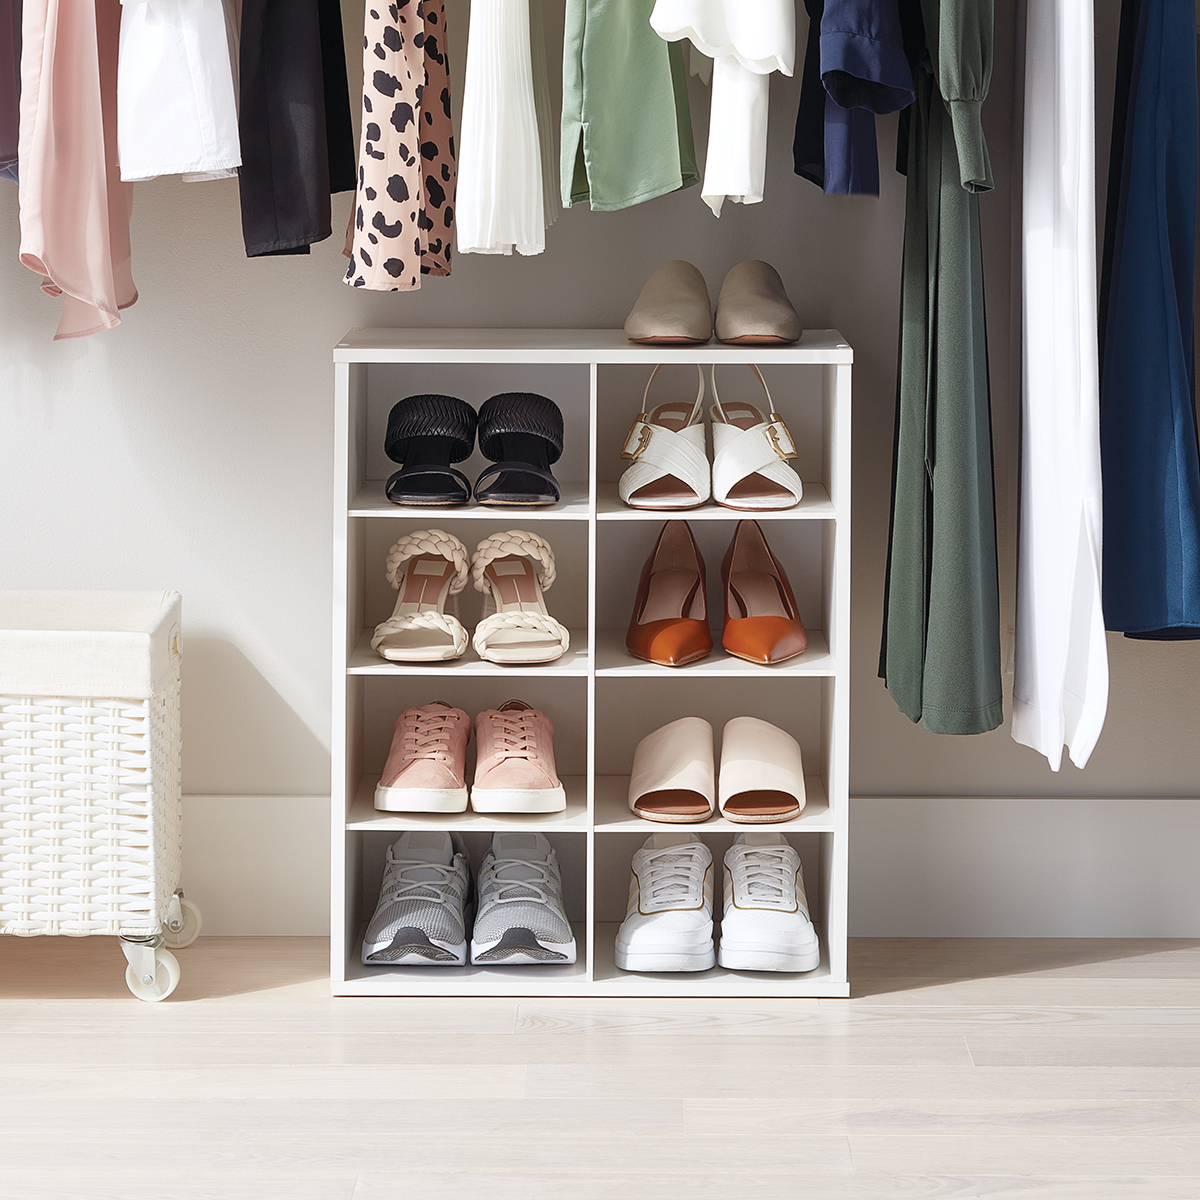 Shoe Storage Ideas: Making the Most of Small Rooms and Closet